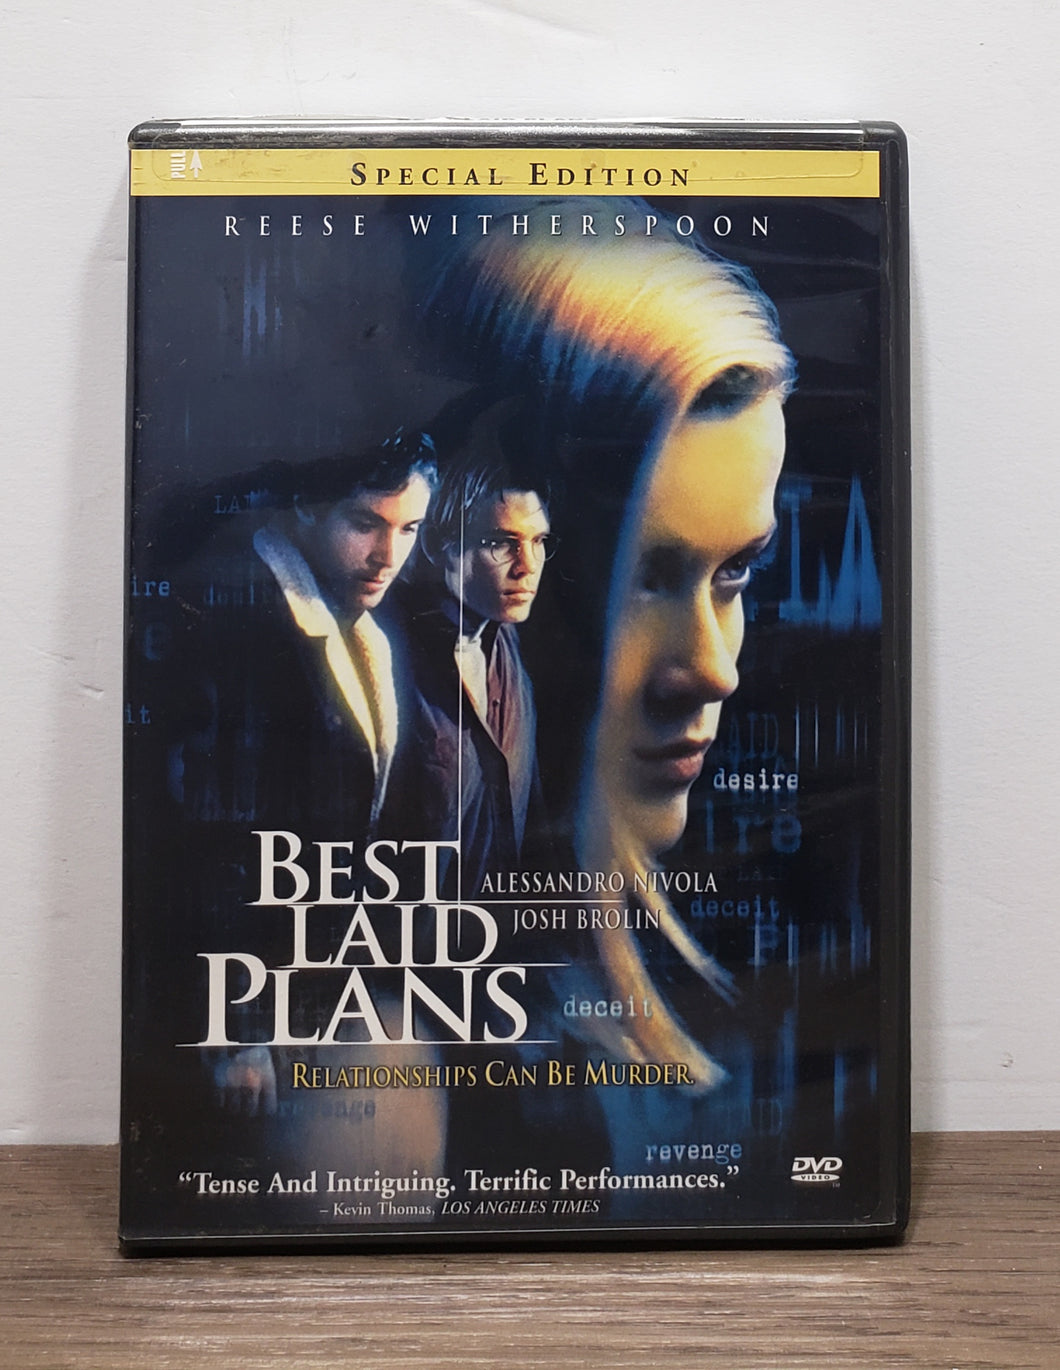 Best Laid Plans (Widescreen Special Edition)